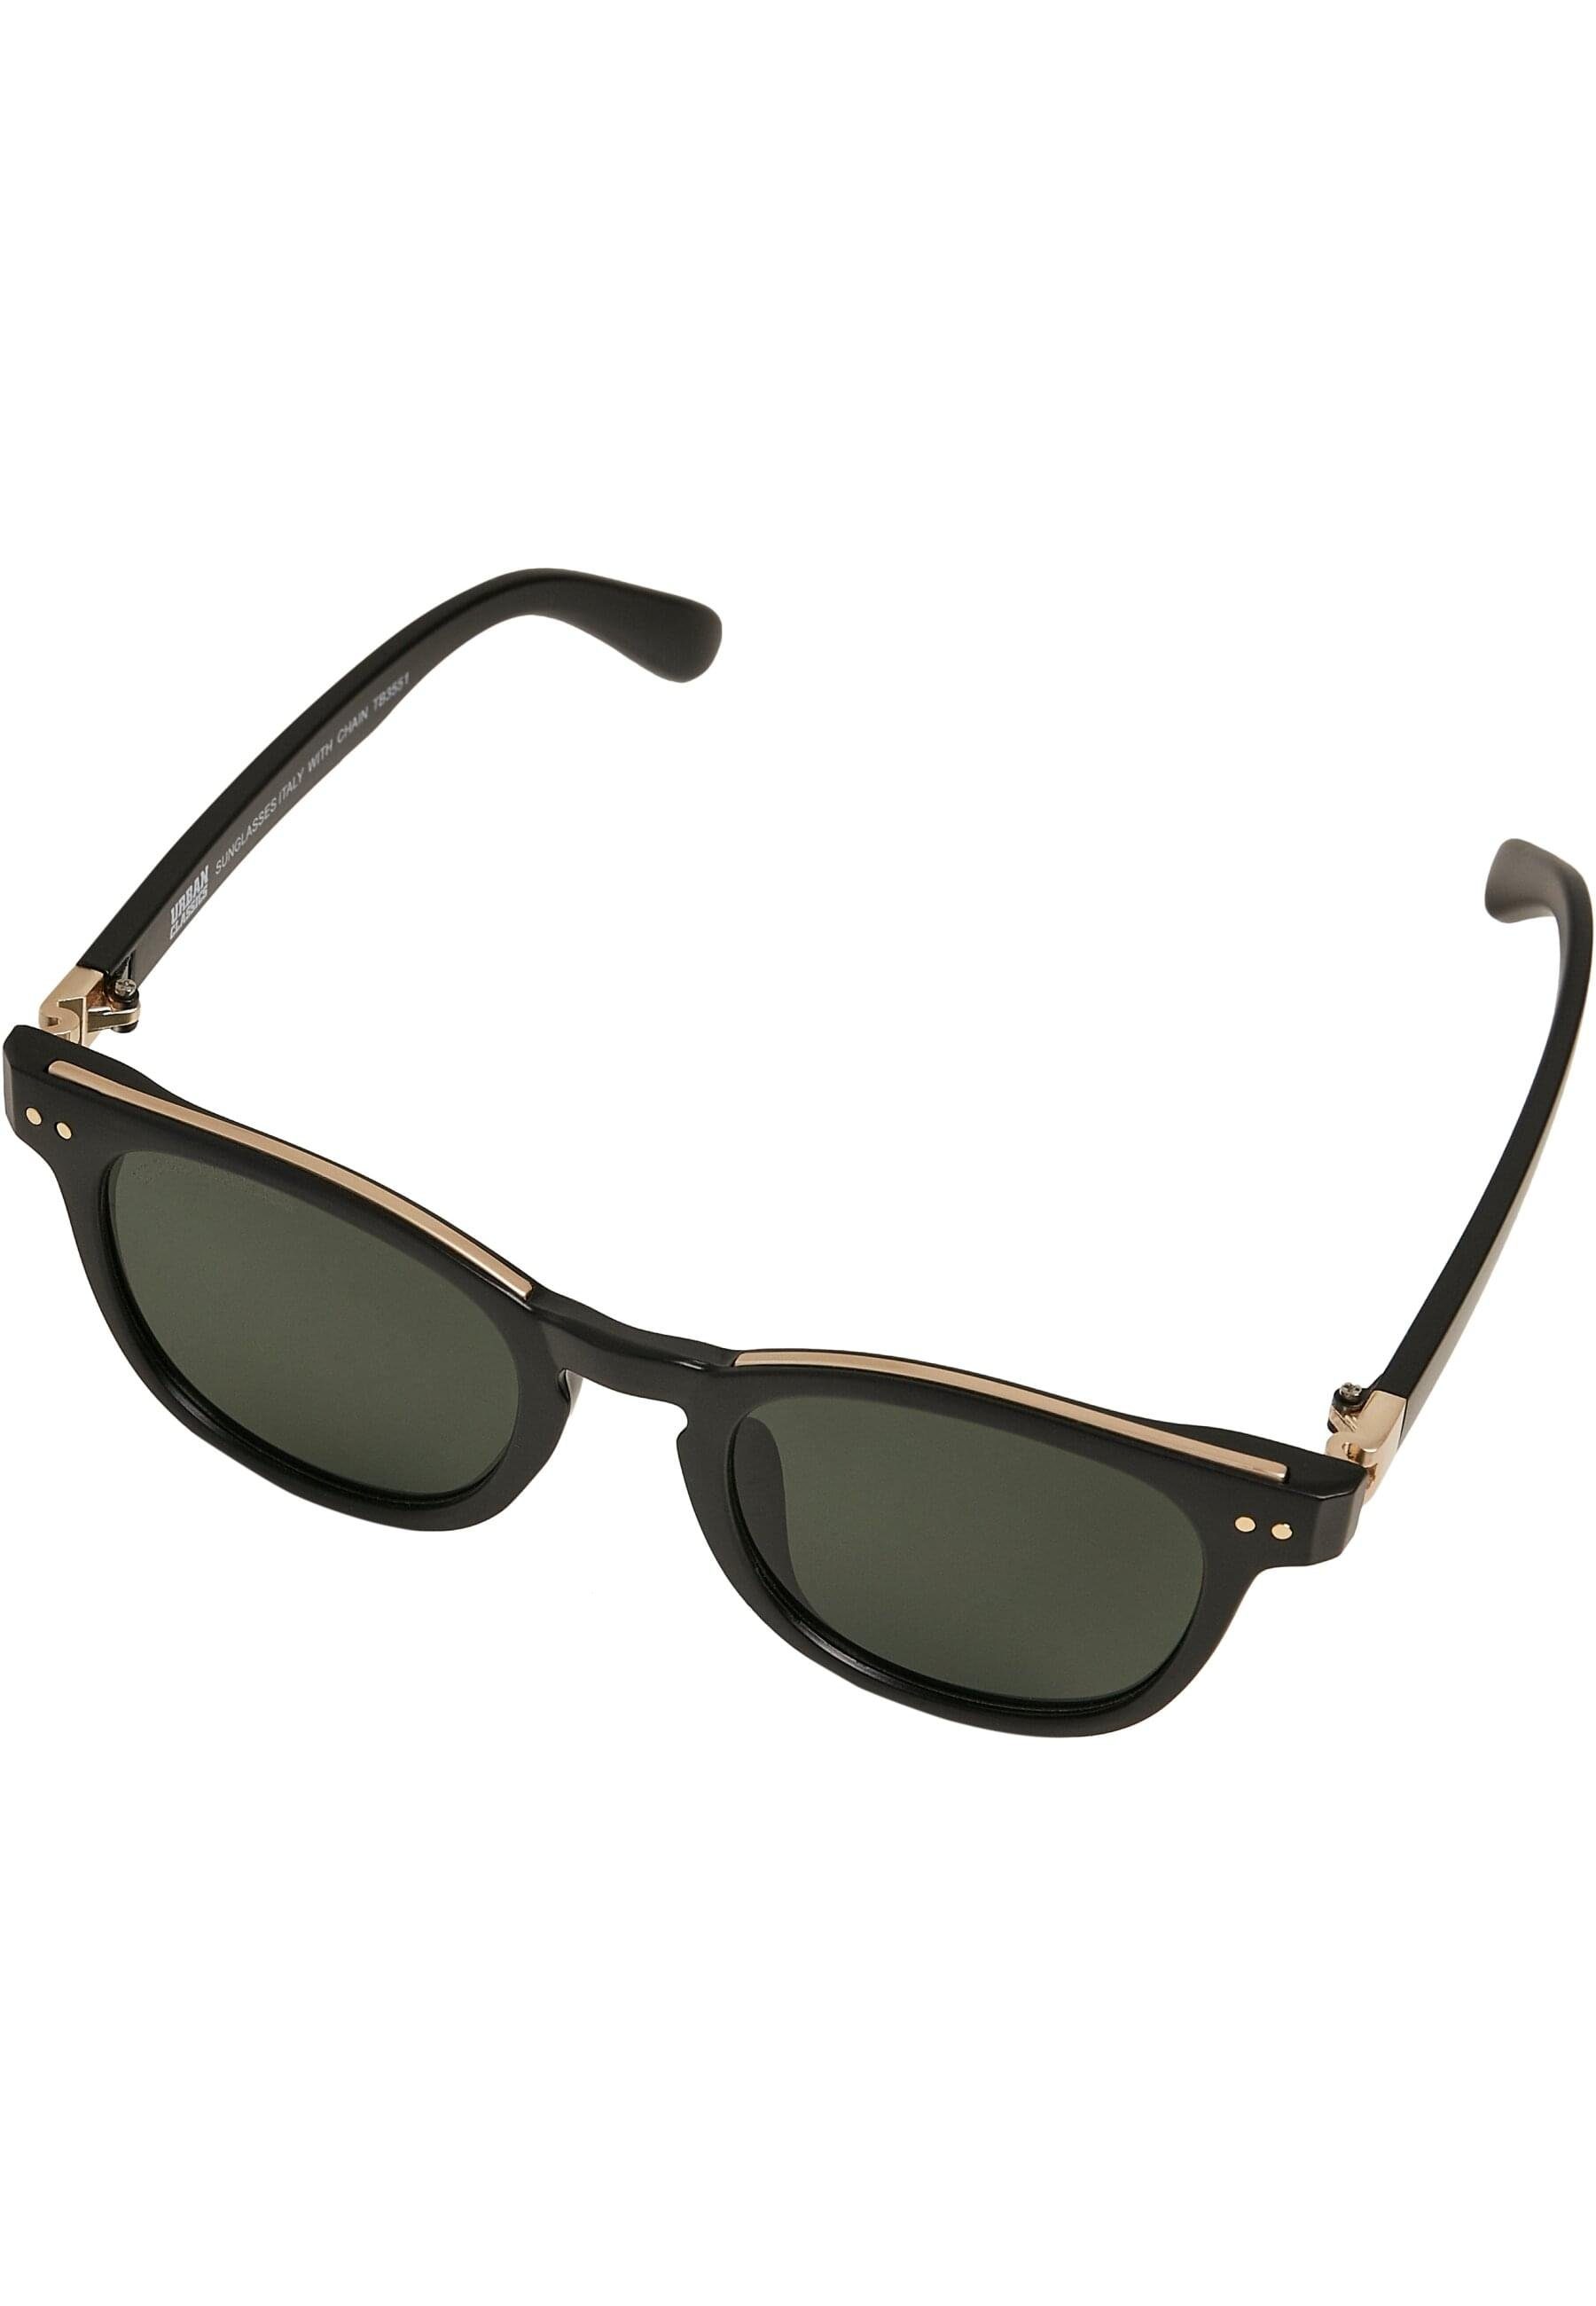 Italy Sunglasses CLASSICS chain Unisex URBAN black/gold/gold Sonnenbrille with